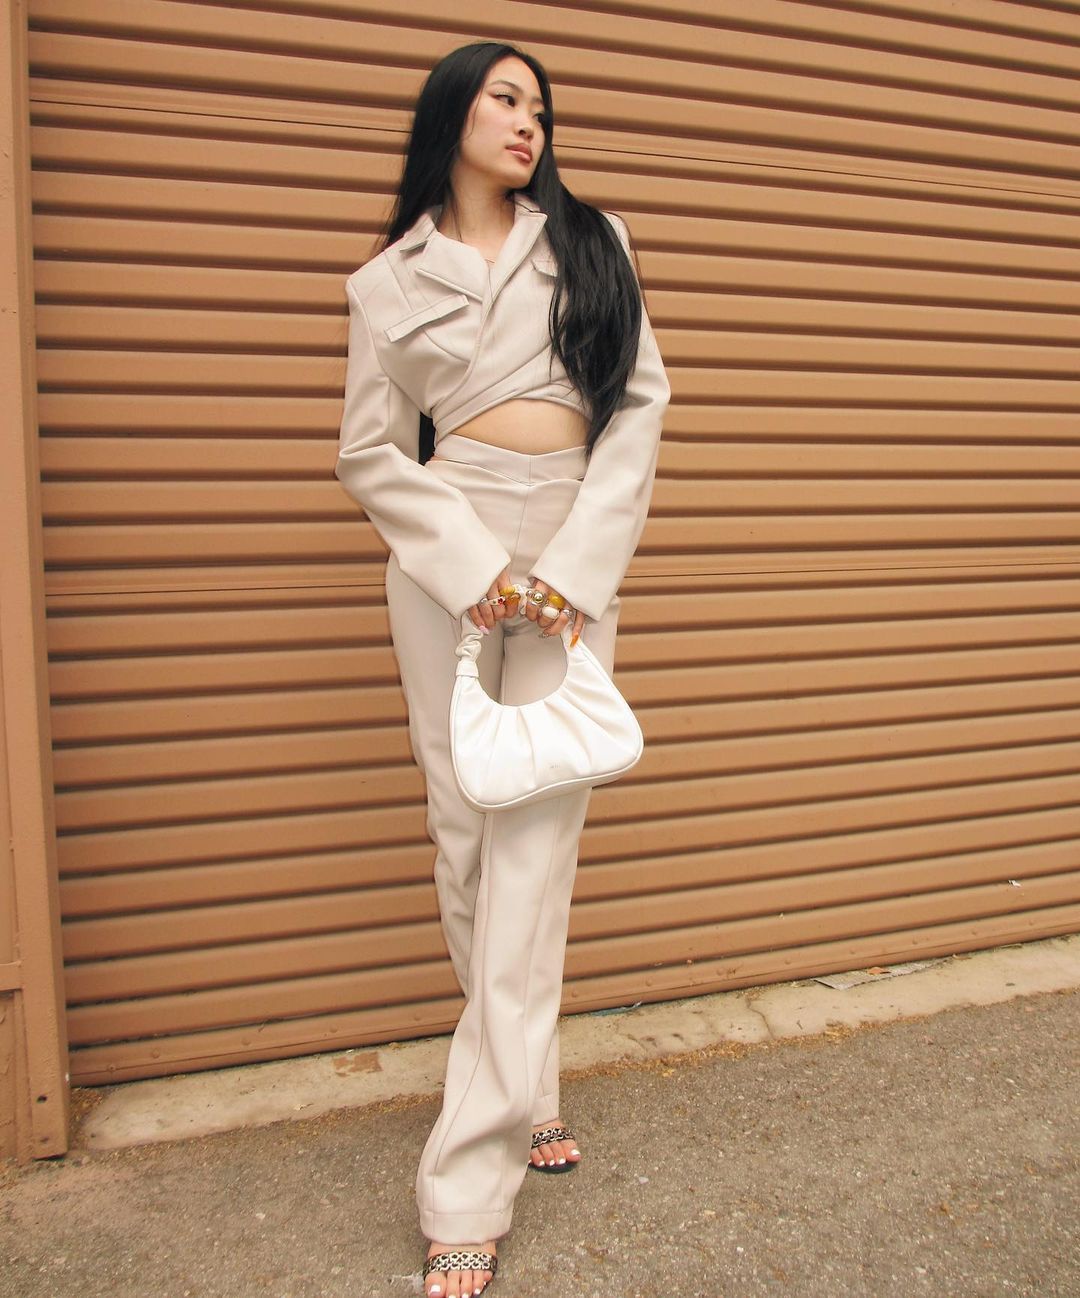 lauren soyung wears a white gabbi bag and beige outfit in front of a brown wall